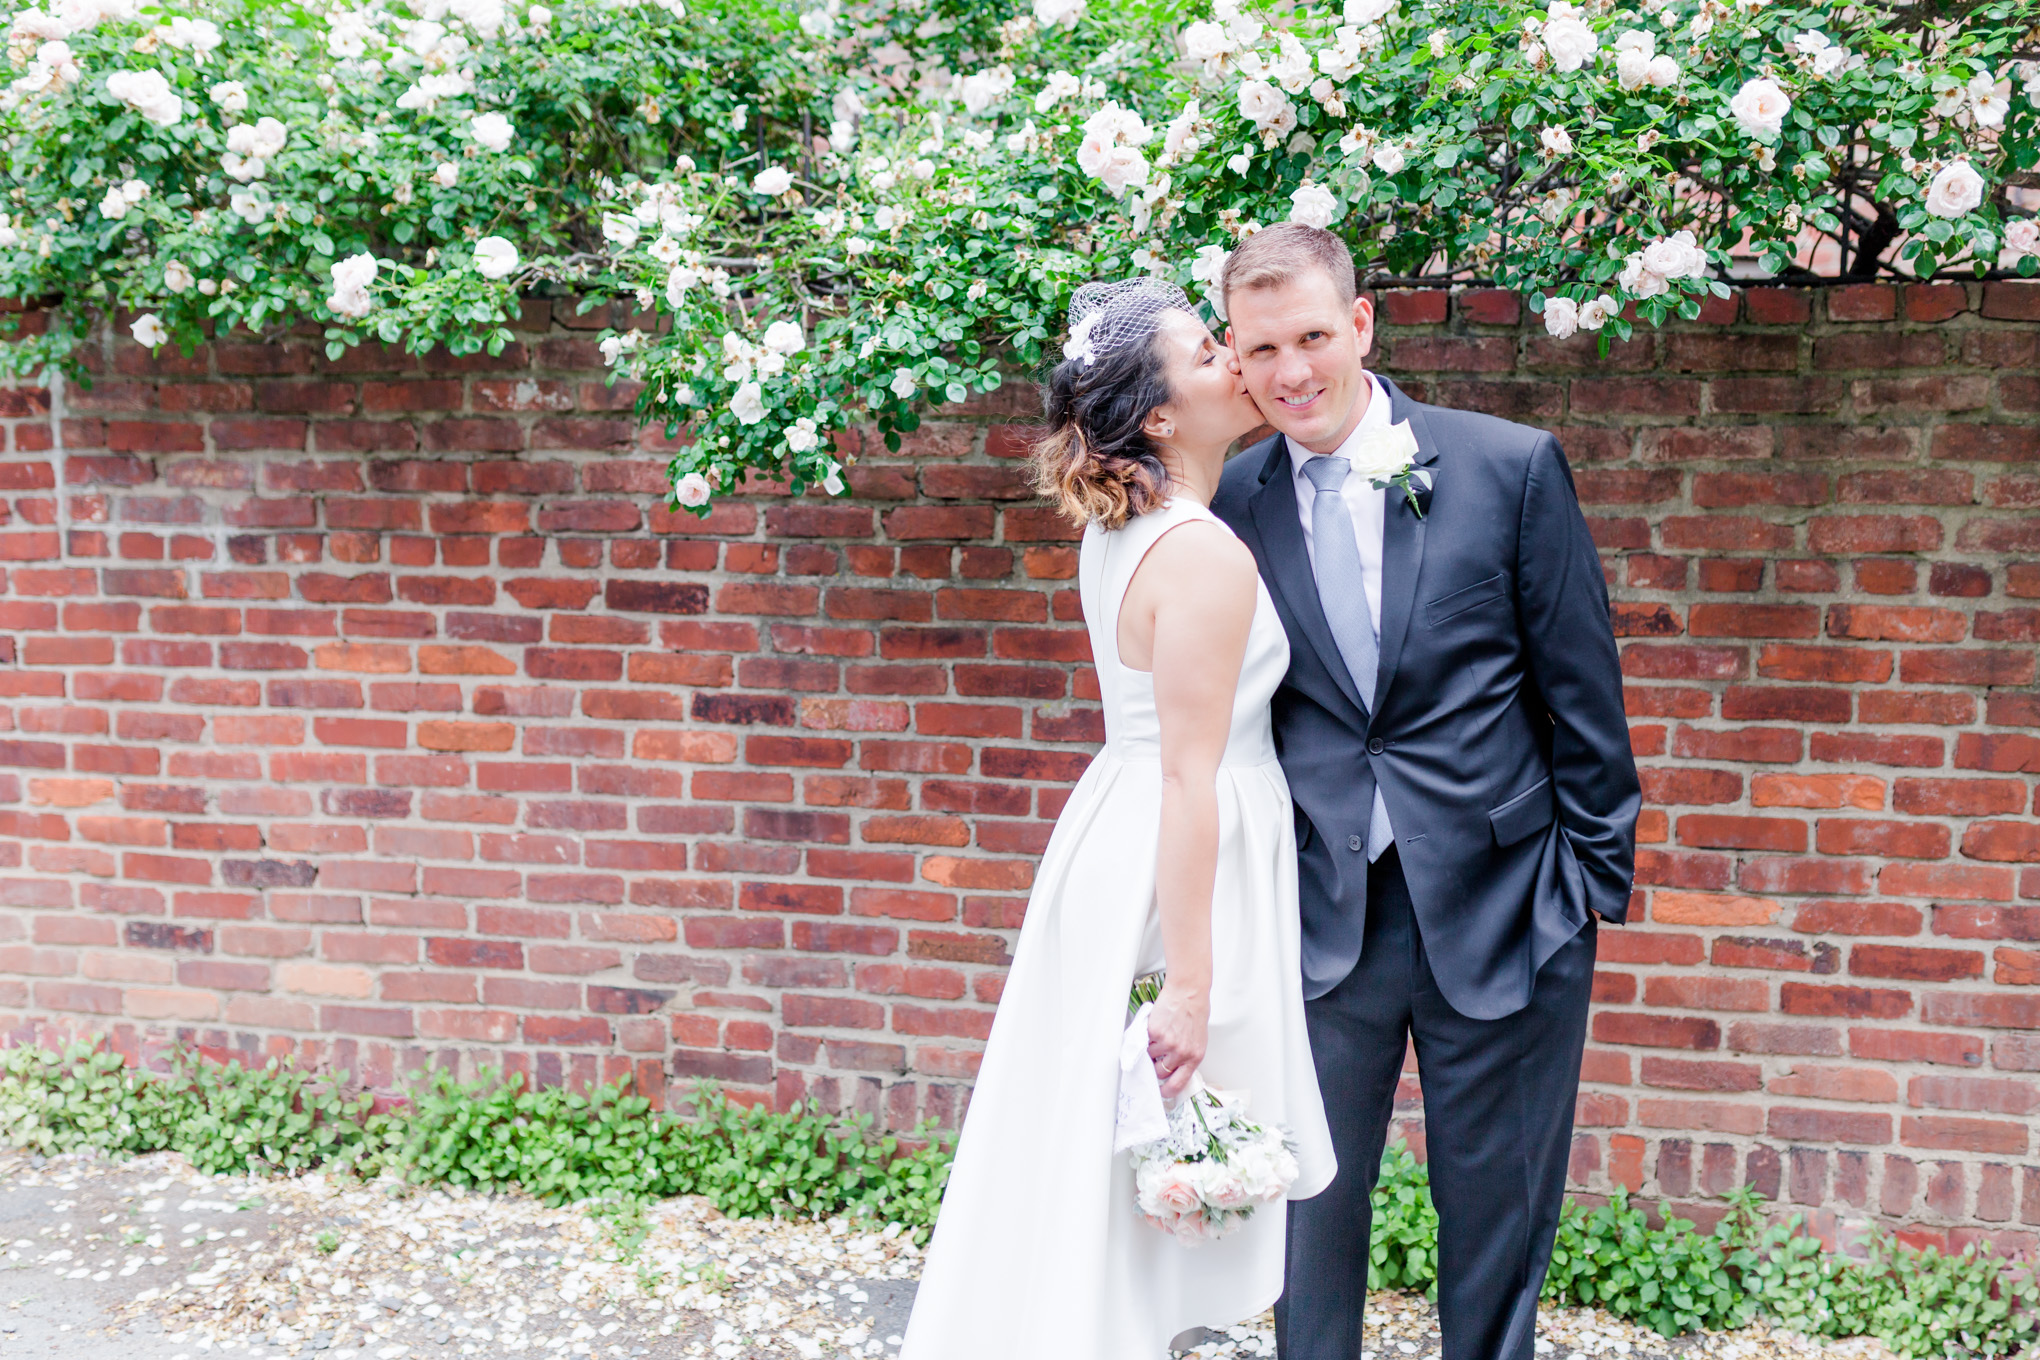 photography ready wedding venues, bride and groom, wedding portraits, portrait locations, old town Alexandria, northern VA wedding venues, Morrison House, Morrison House wedding, kissing pic, a-line wedding gown, rose garden